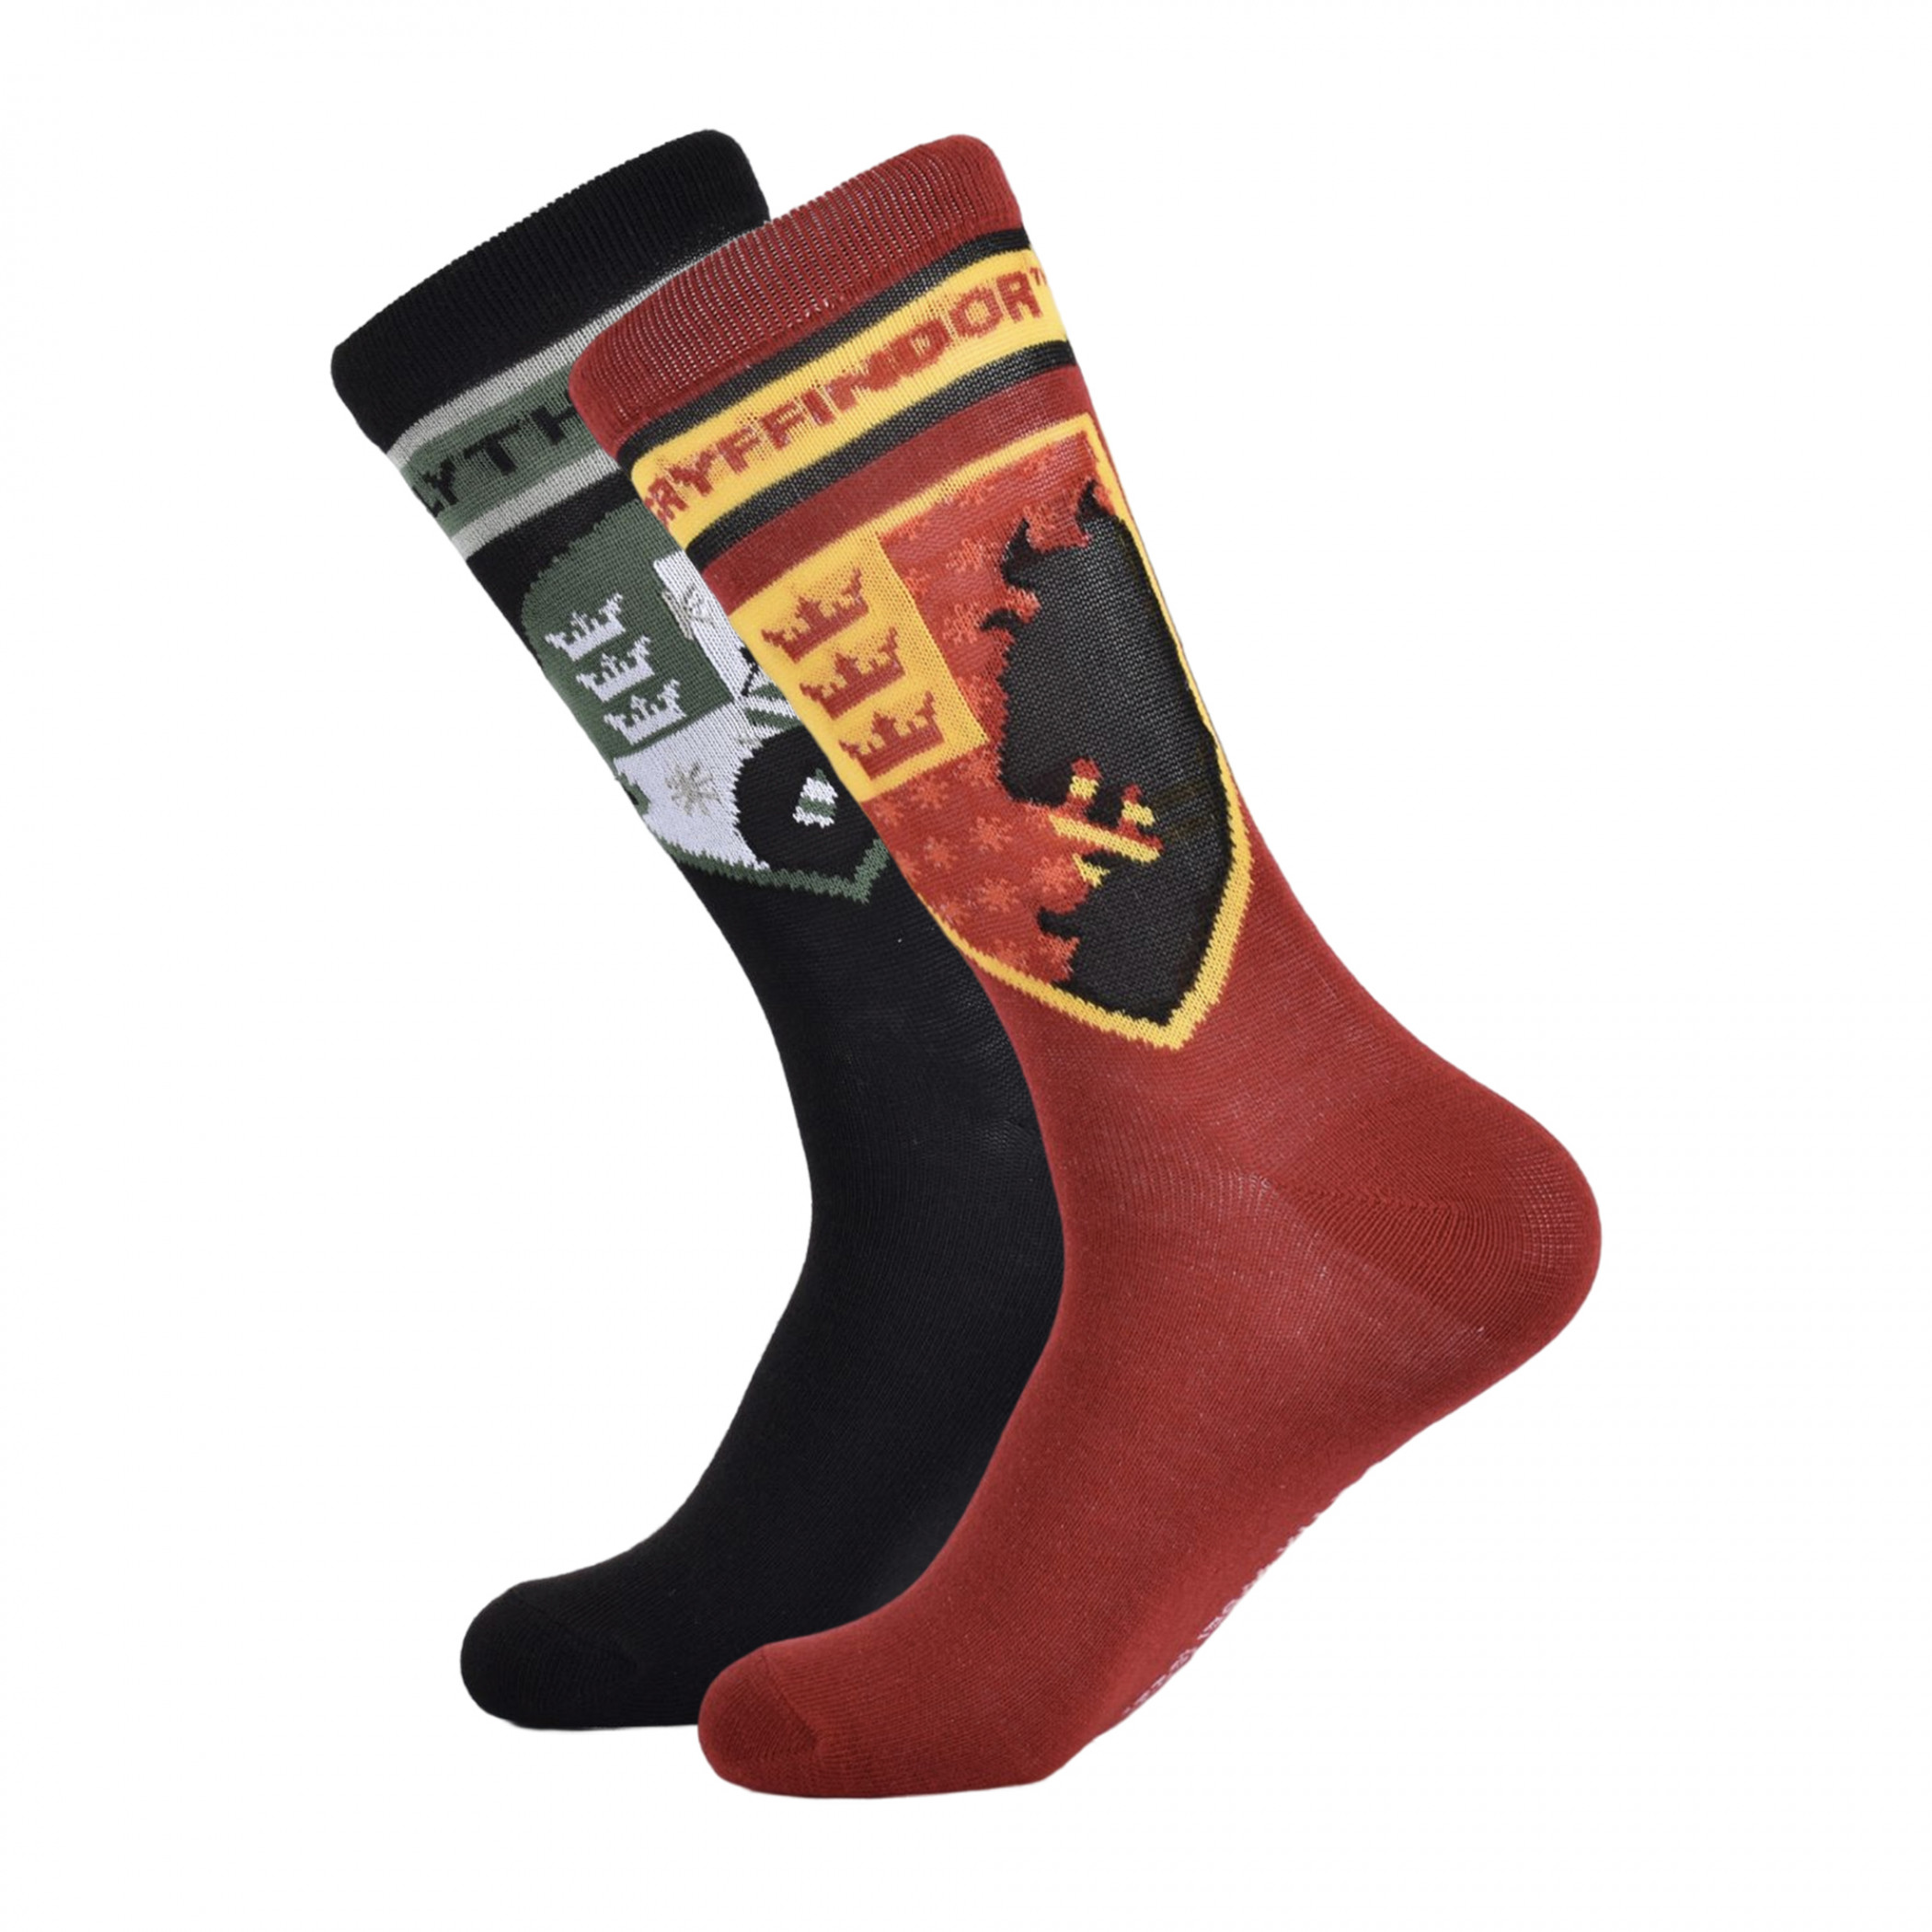 Harry Potter Gryffindor and Slytherin House Crew Socks Boxed Set 2-Pairs